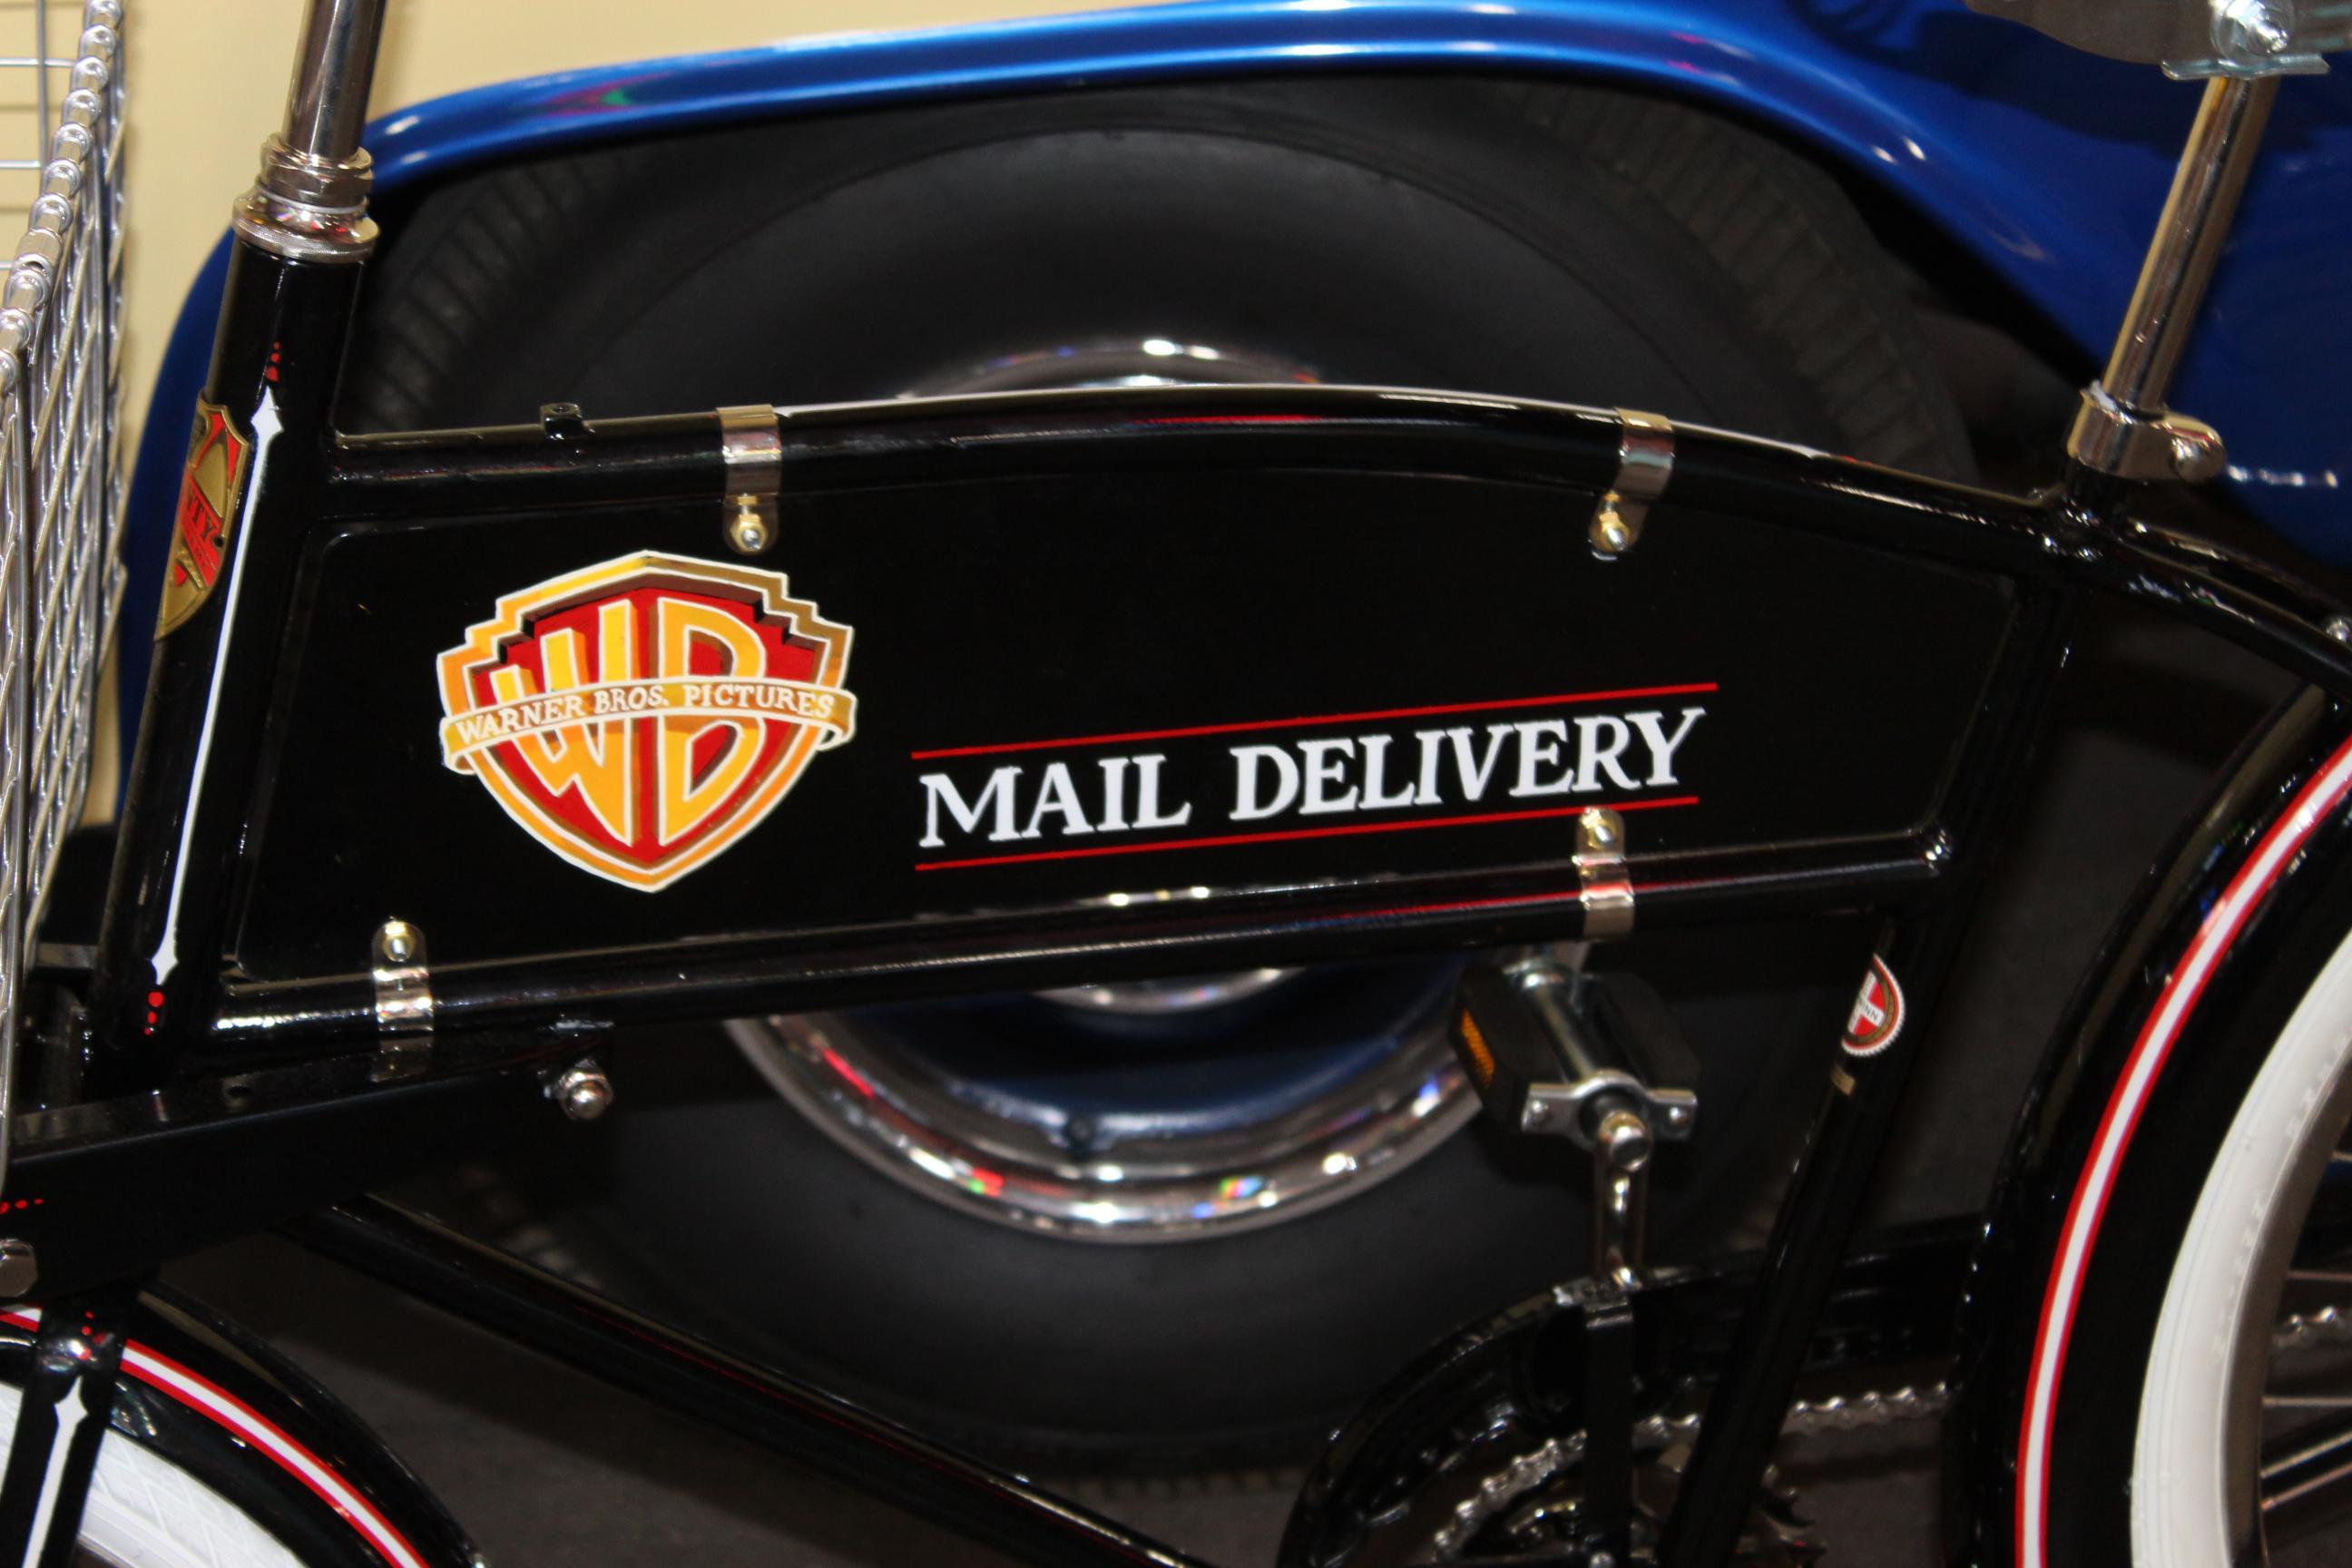 Amazing mail delivery bike with Warner Brothers Theme. This bicycle has the smaller basket option that measures 24